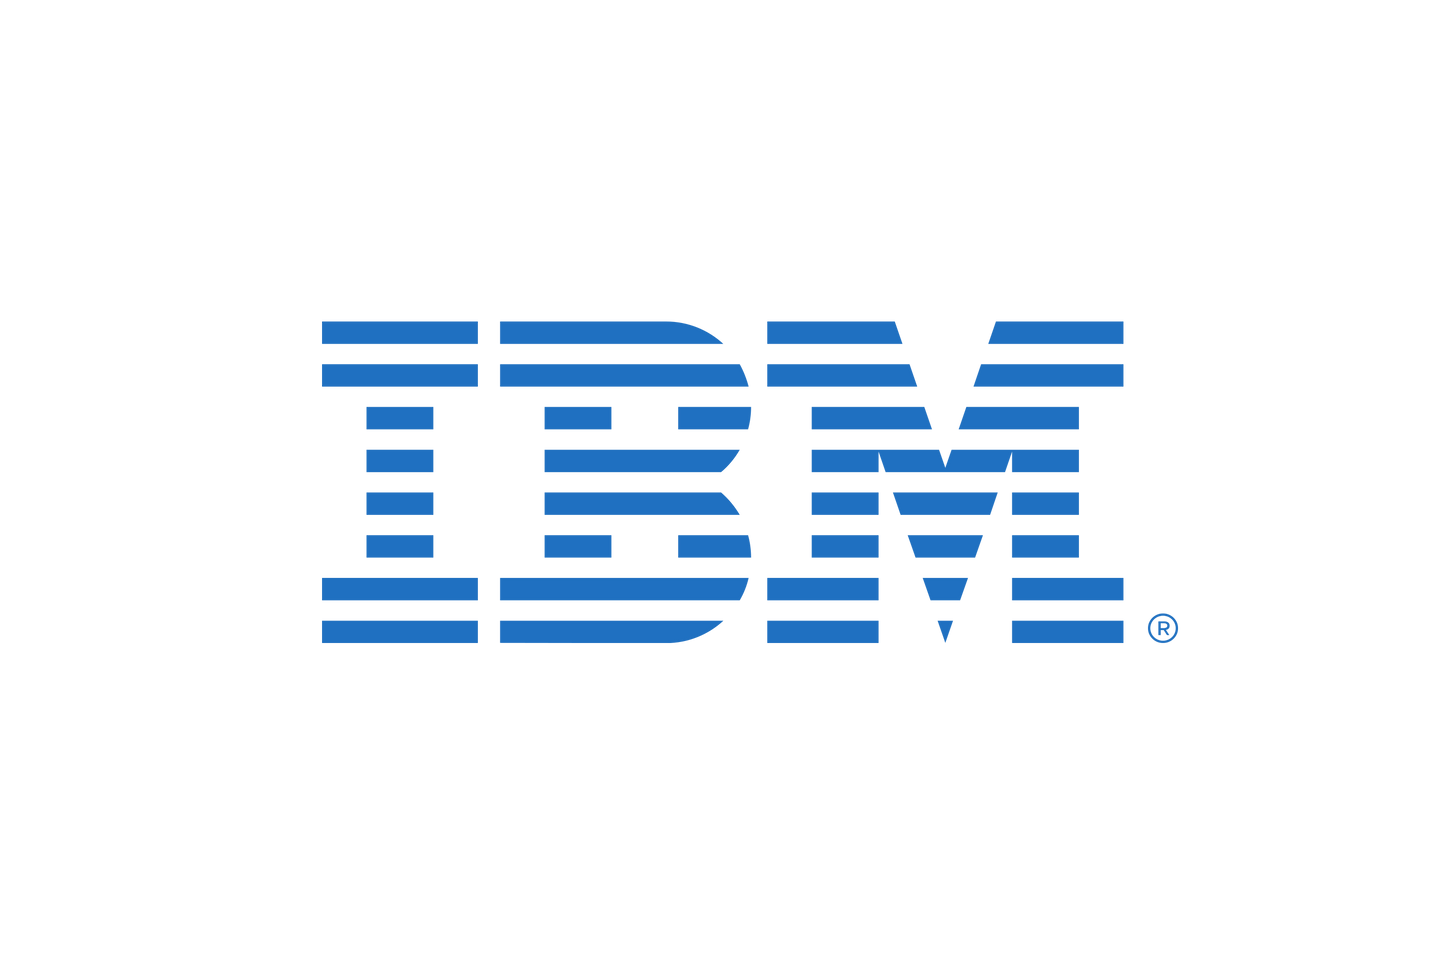 IBM SPSS Collaboration and Deployment Svcs for Non-Production Environment for zEnterprise BladeCenter Extension and Linux on System z Processor Value Unit (PVU) Monthly License